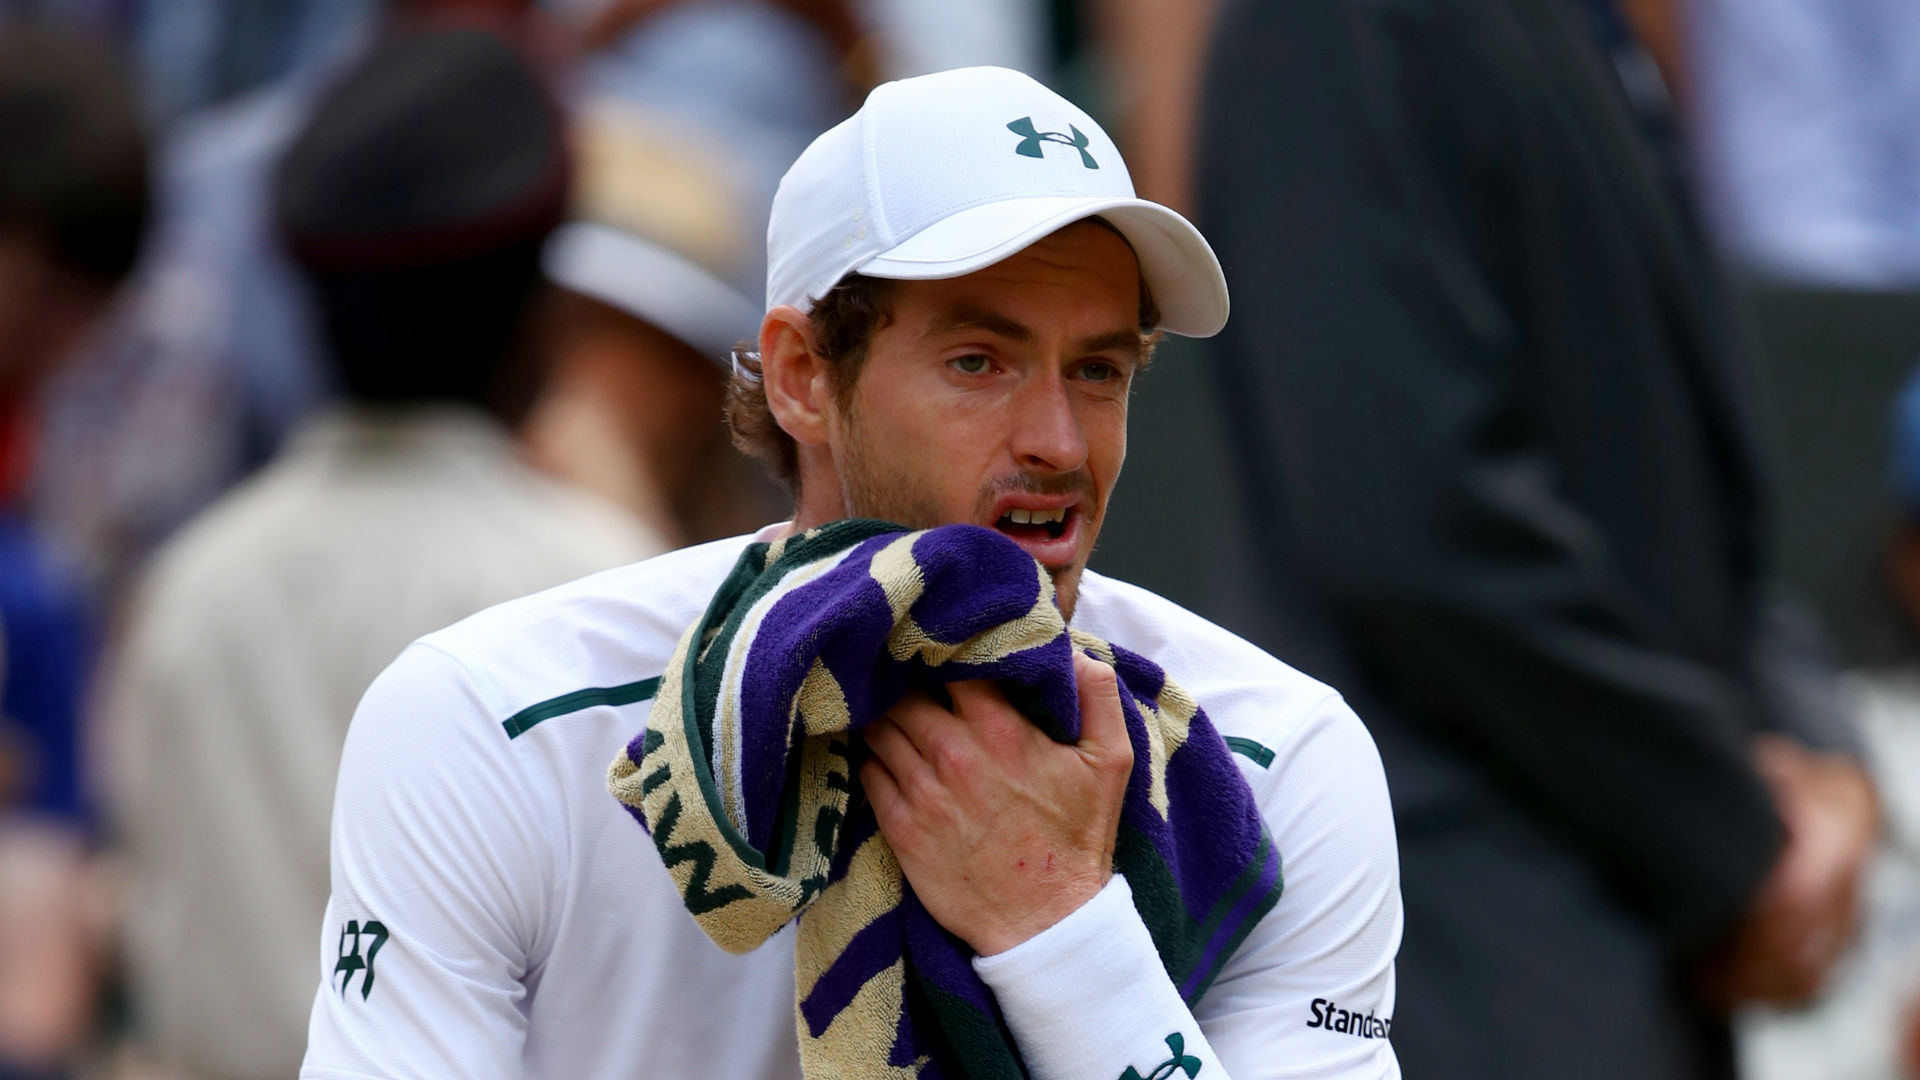 Murray Seeks Long-Term Solution for Hip Injury After Wimbledon Exit